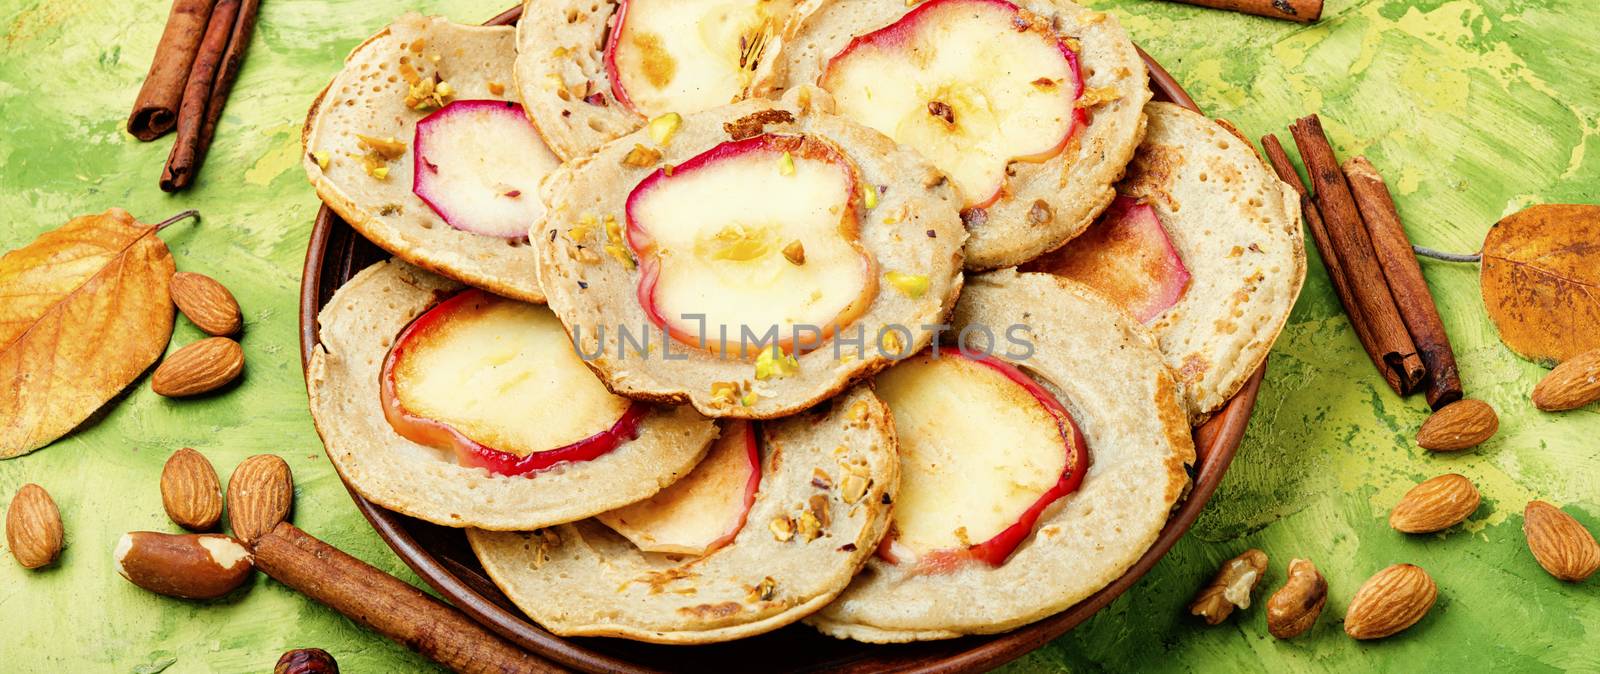 Fried pancakes with apples by LMykola